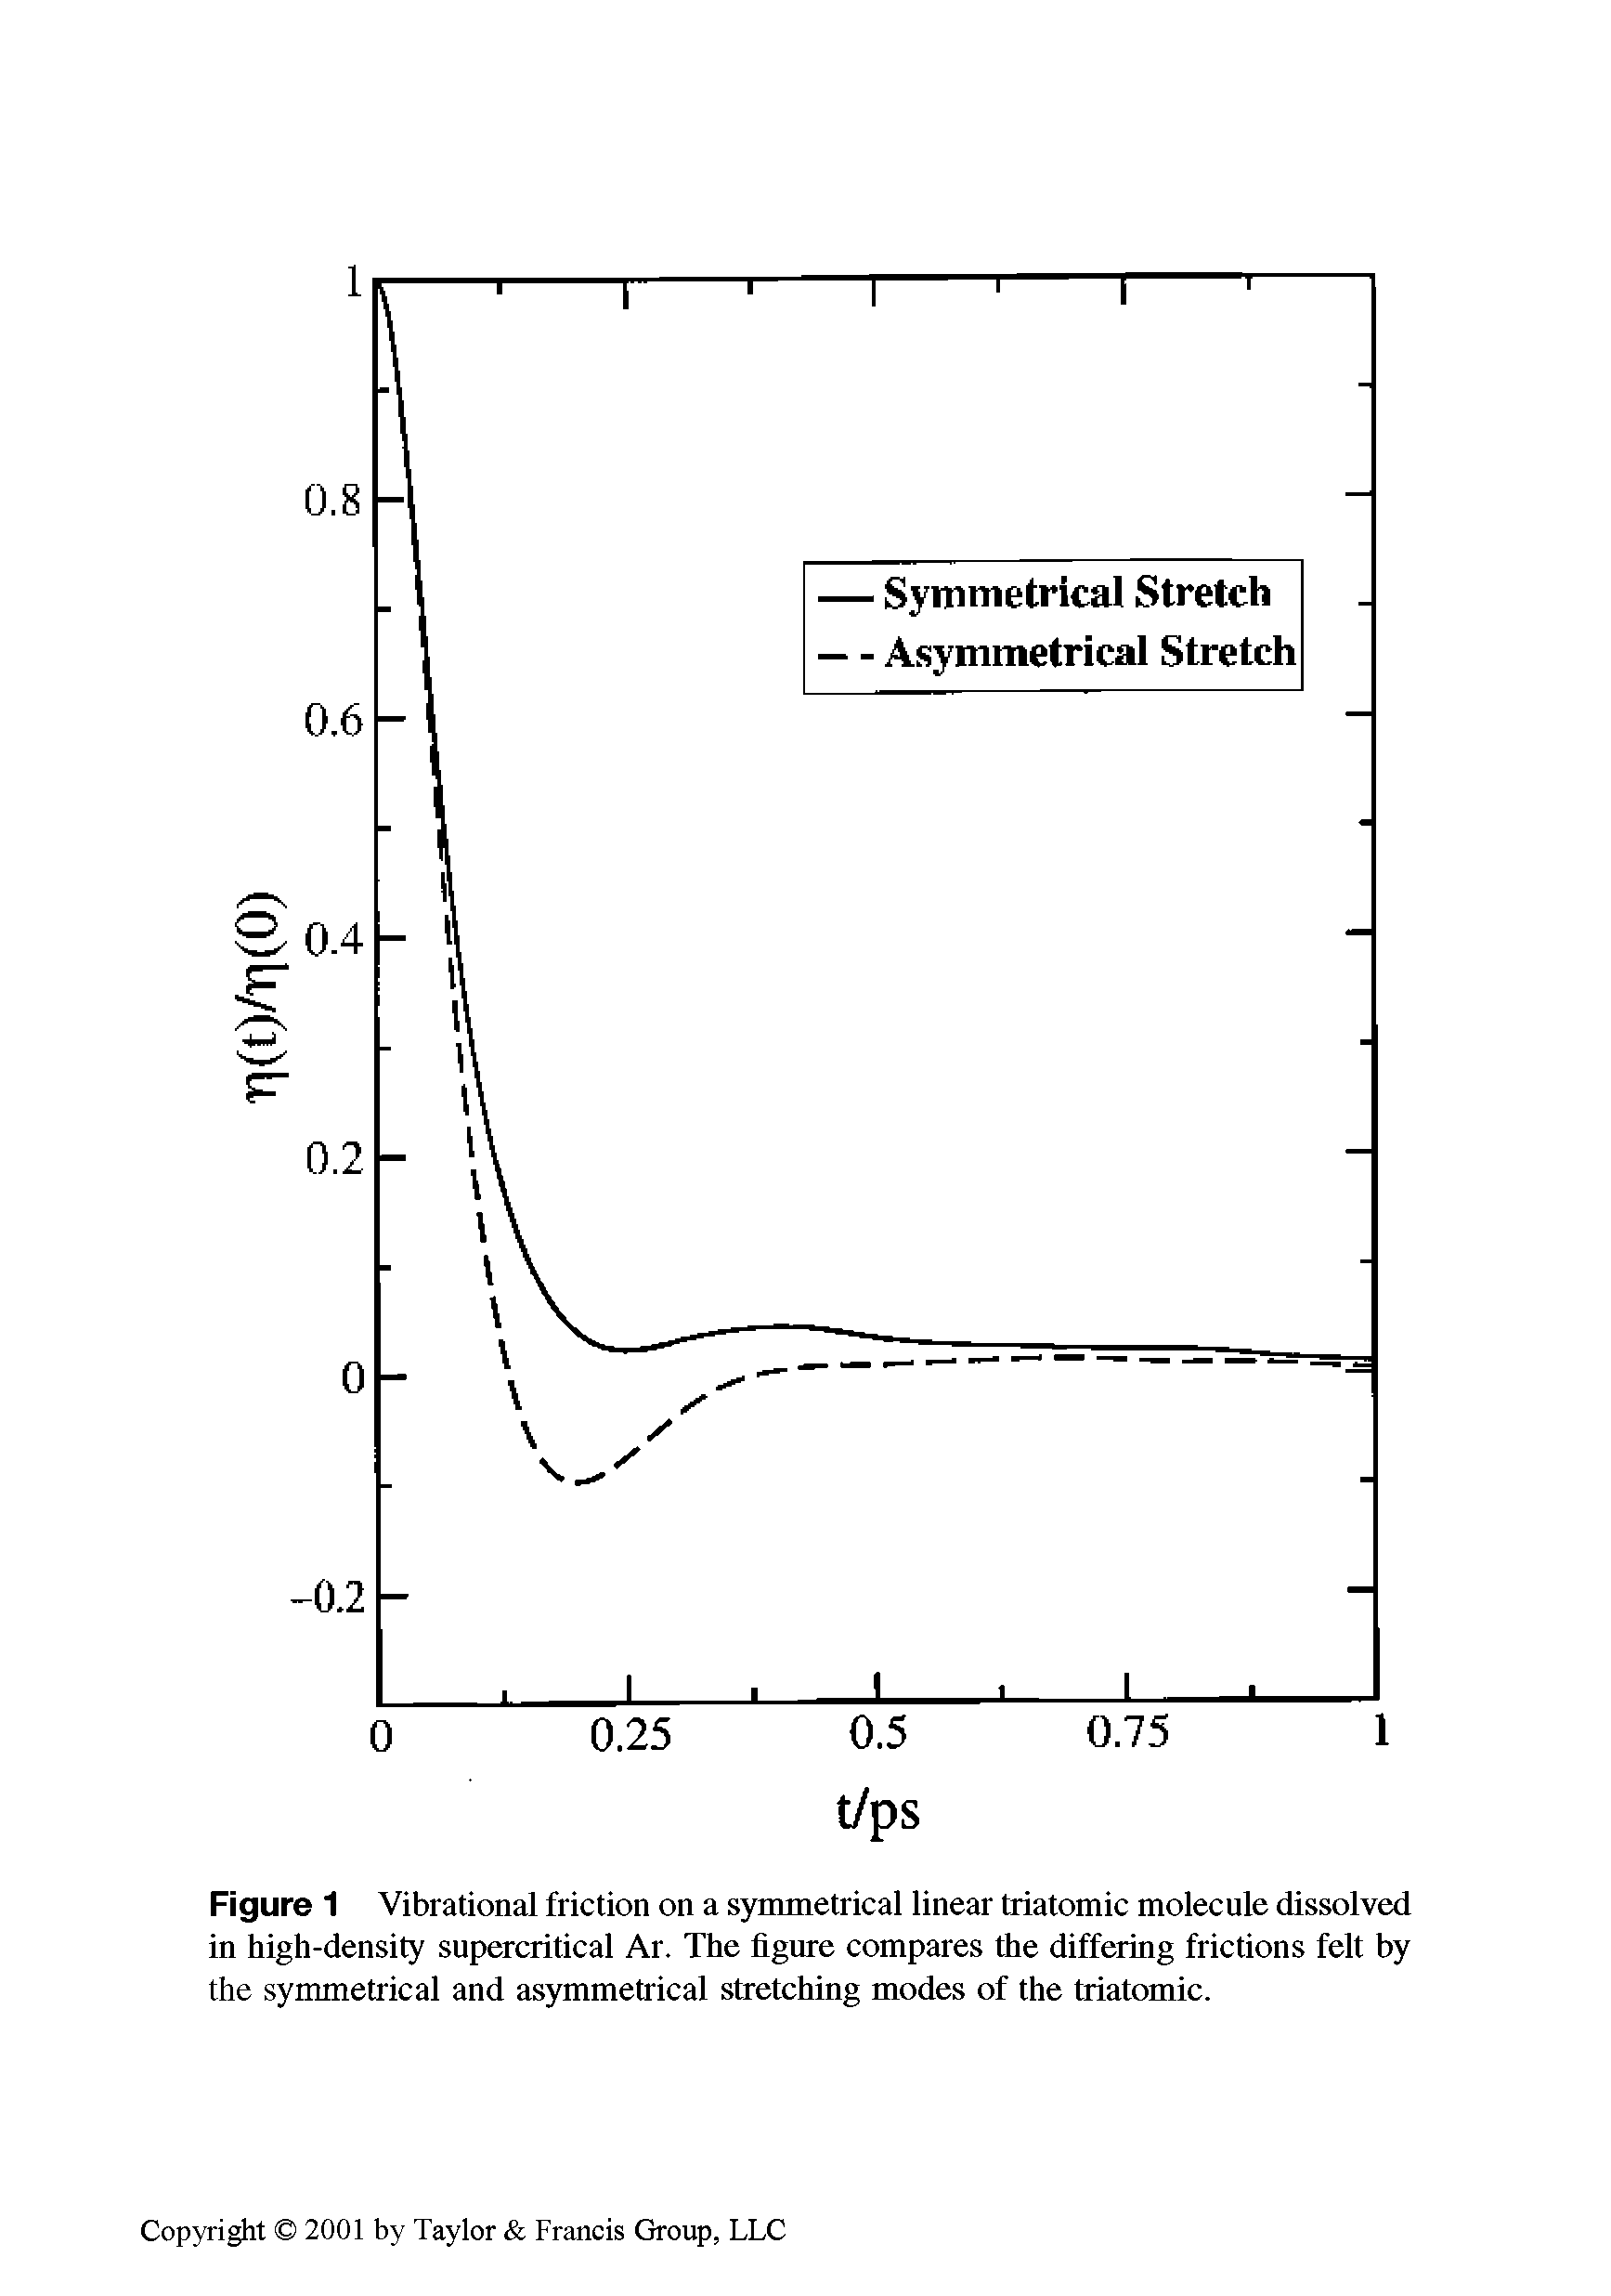 Figure 1 Vibrational friction on a symmetrical linear triatomic molecule dissolved in high-density supercritical Ar. The figure compares the differing frictions felt by the symmetrical and asymmetrical stretching modes of the triatomic.